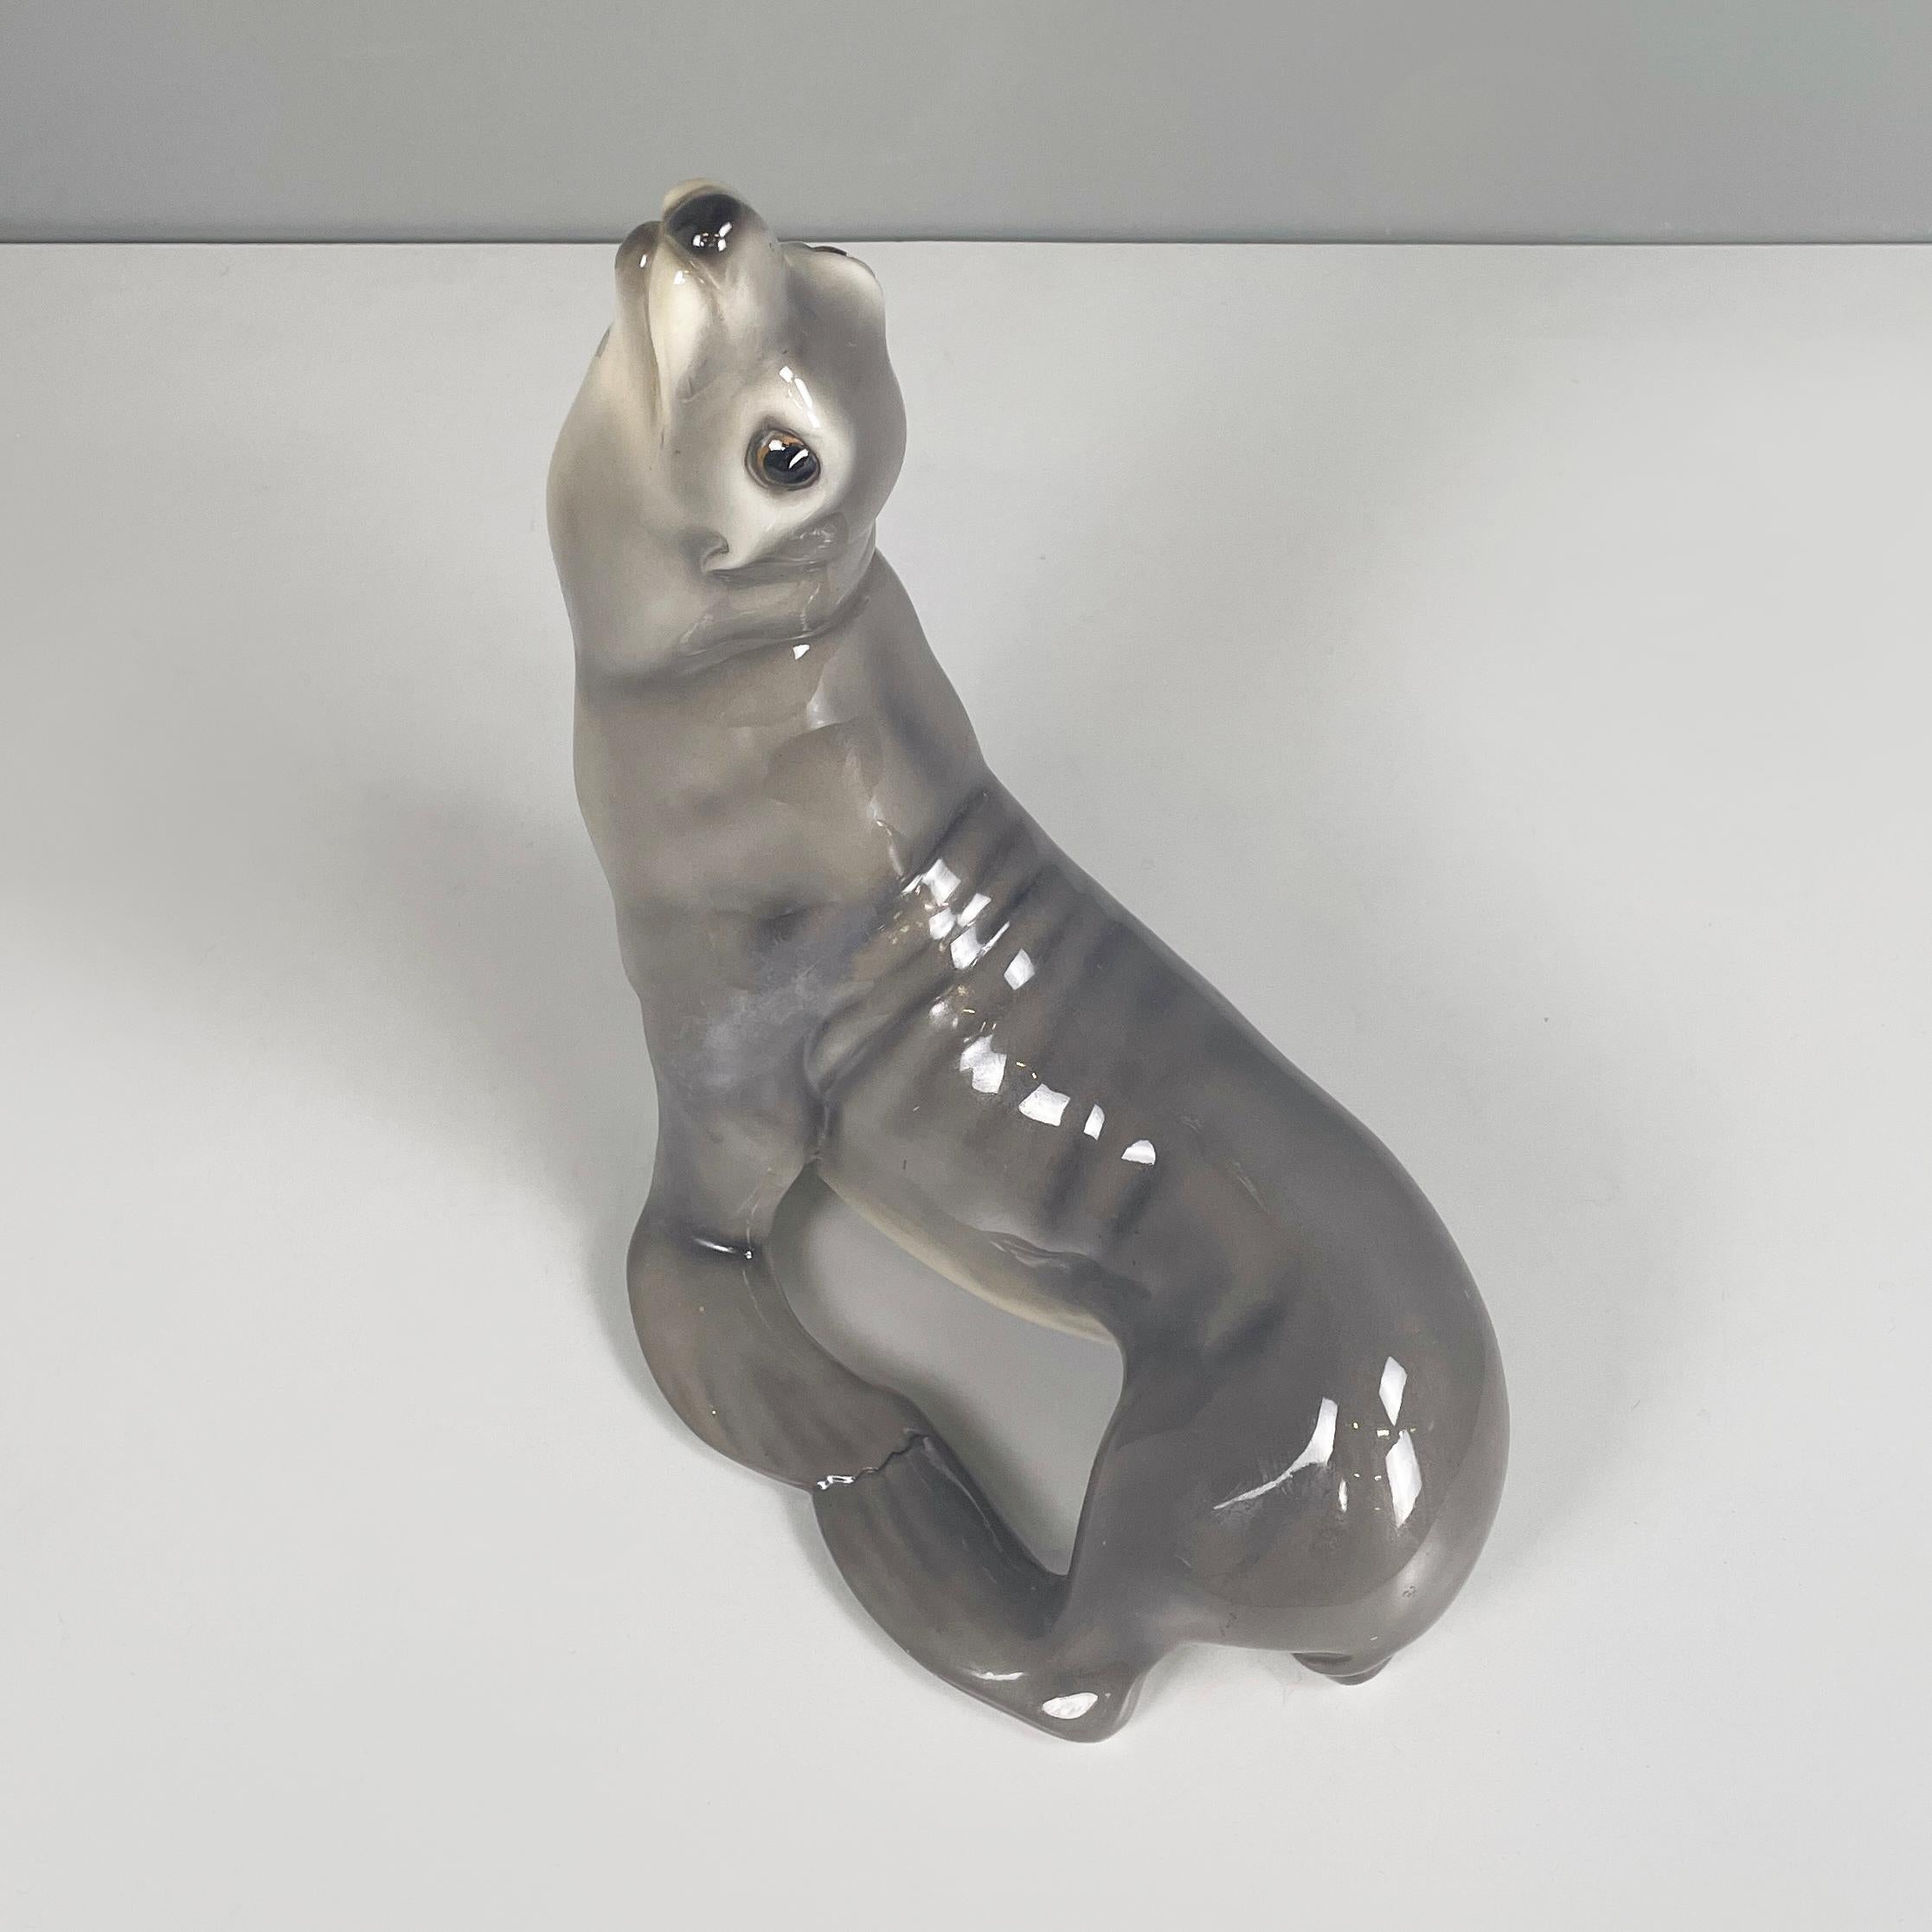 Italian mid-century Ceramic sculpture of a sea lion by Urbano Zaccagnini, 1920s
Ceramic sculpture depicting a sea lion with its snout pointing upwards. Finely crafted and painted.
Produced by Urbano Zaccagnini in 1920s. Signature present under the